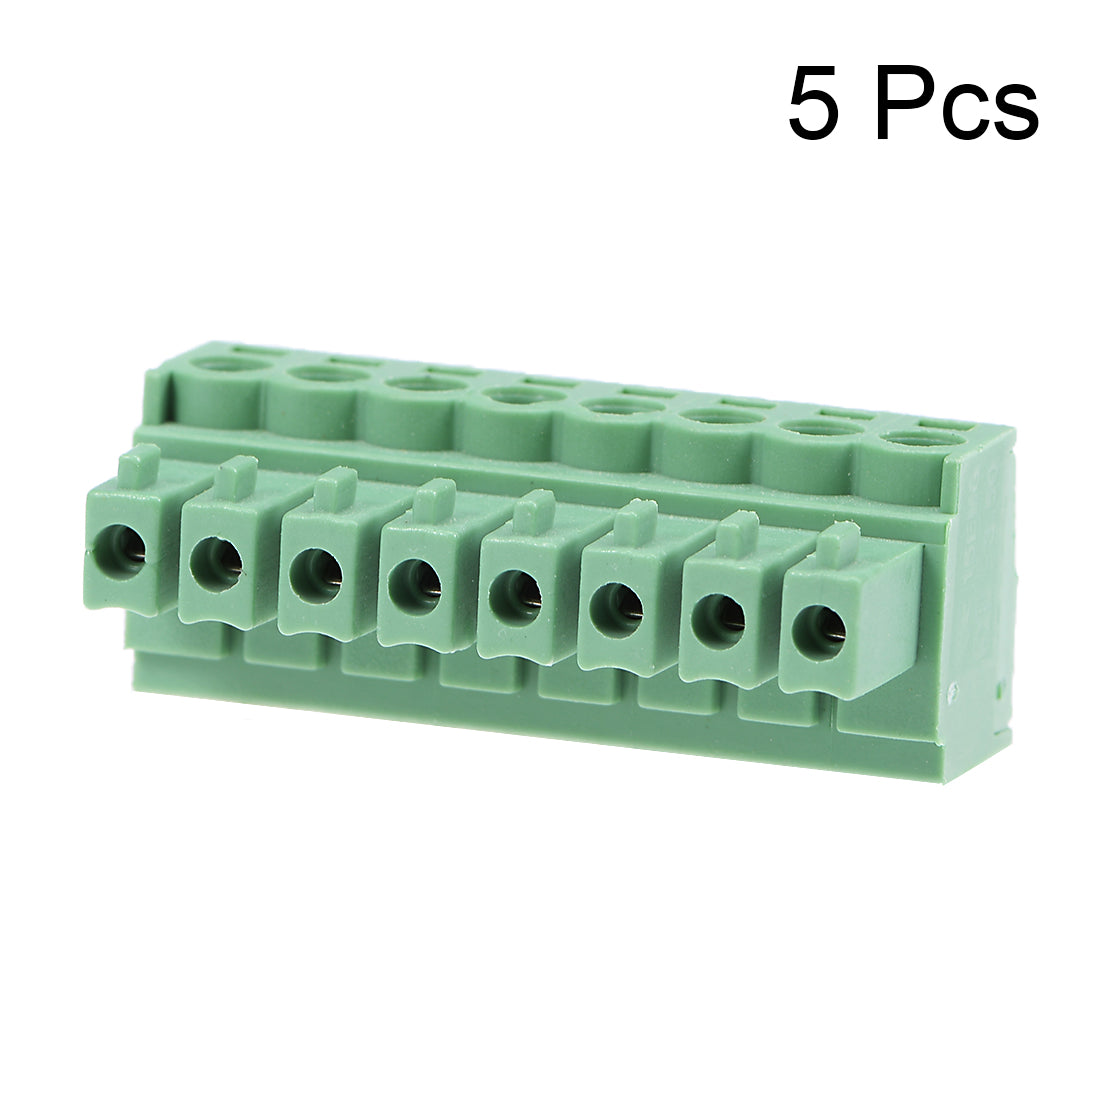 uxcell Uxcell 5Pcs AC300V 8A 3.5mm Pitch 8P Needle Seat Insert-In PCB Terminal Block green